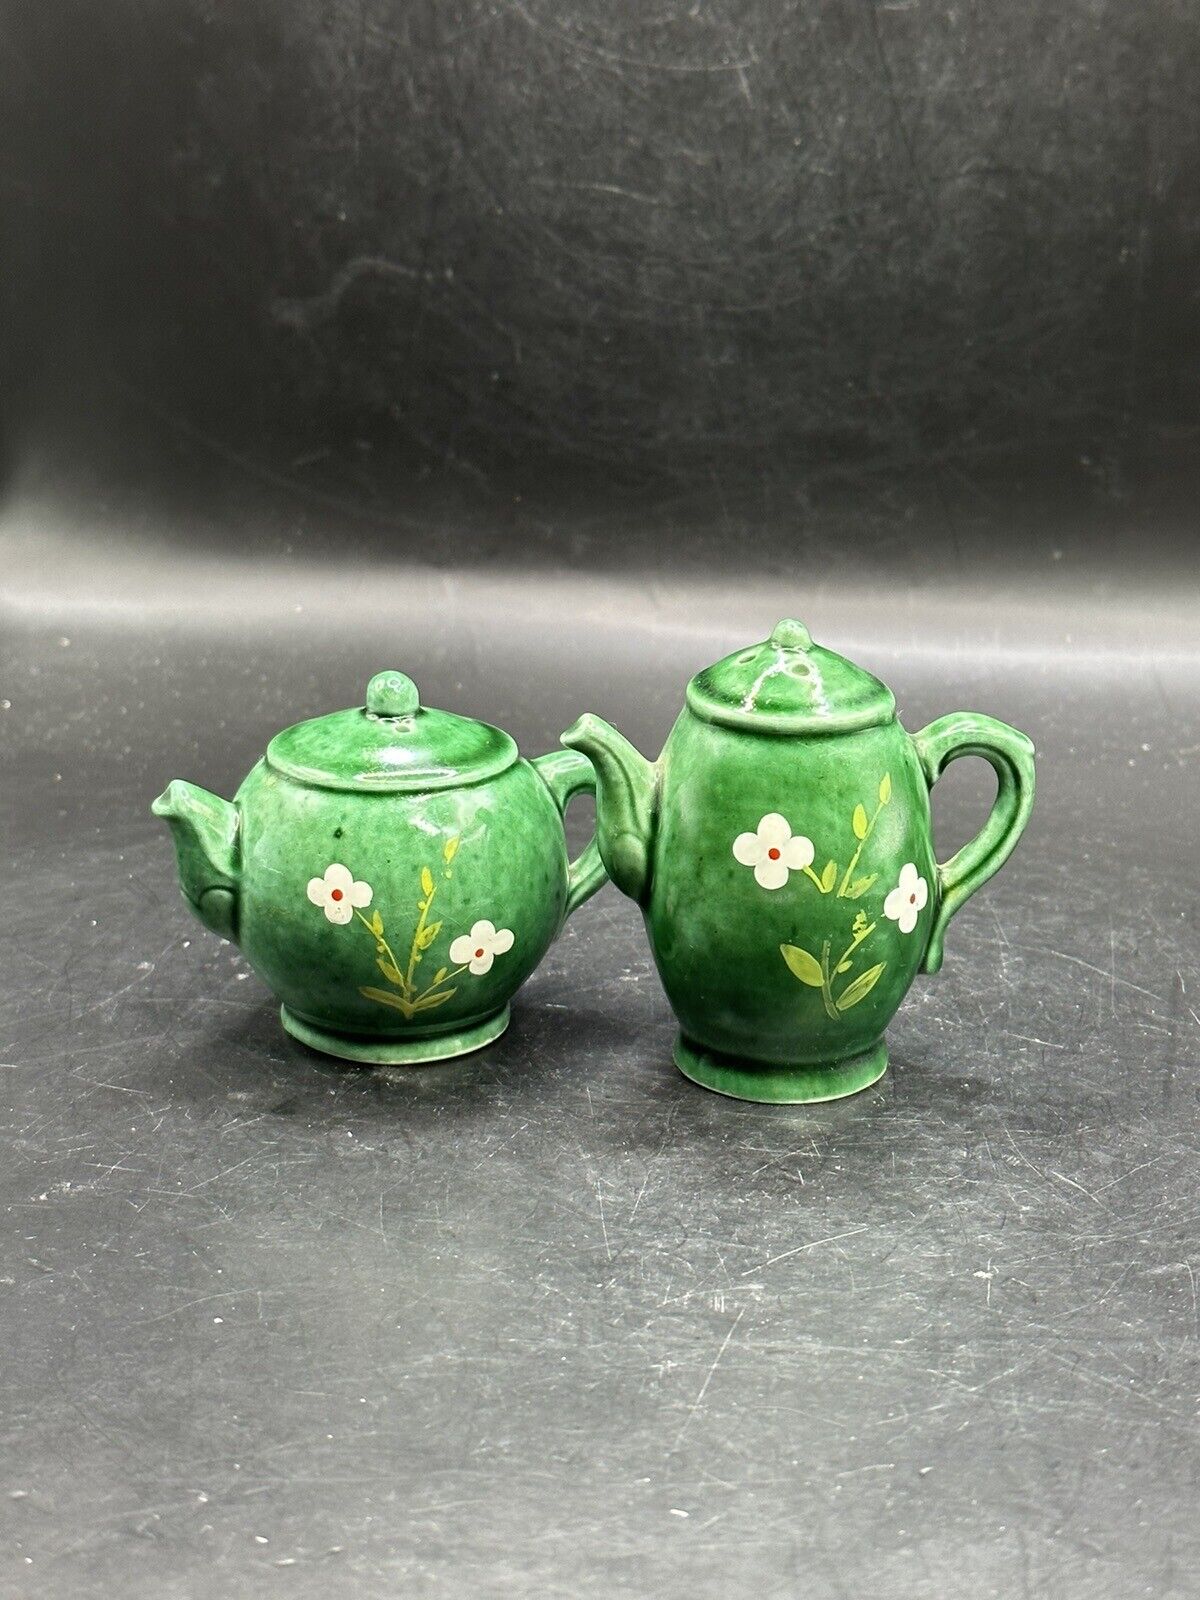 Vintage 1960s Germany Green Teapot Salt & Pepper Shakers Hand Painted